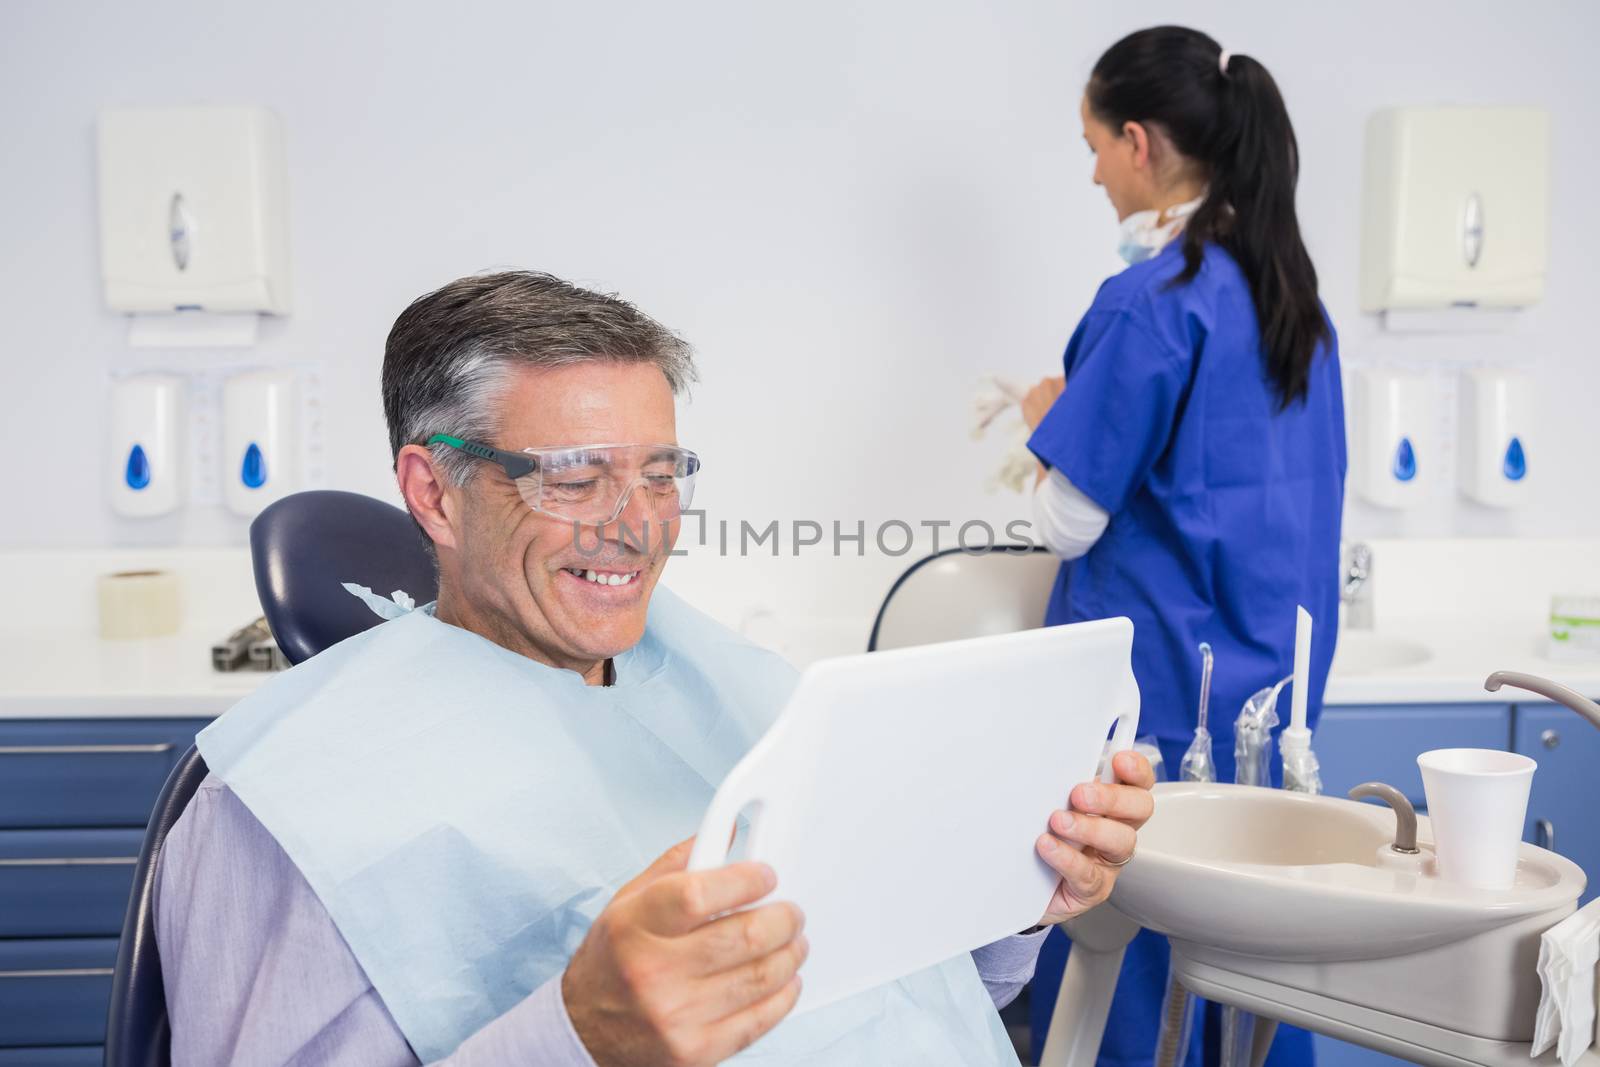 Smiling patient holding a mirror by Wavebreakmedia